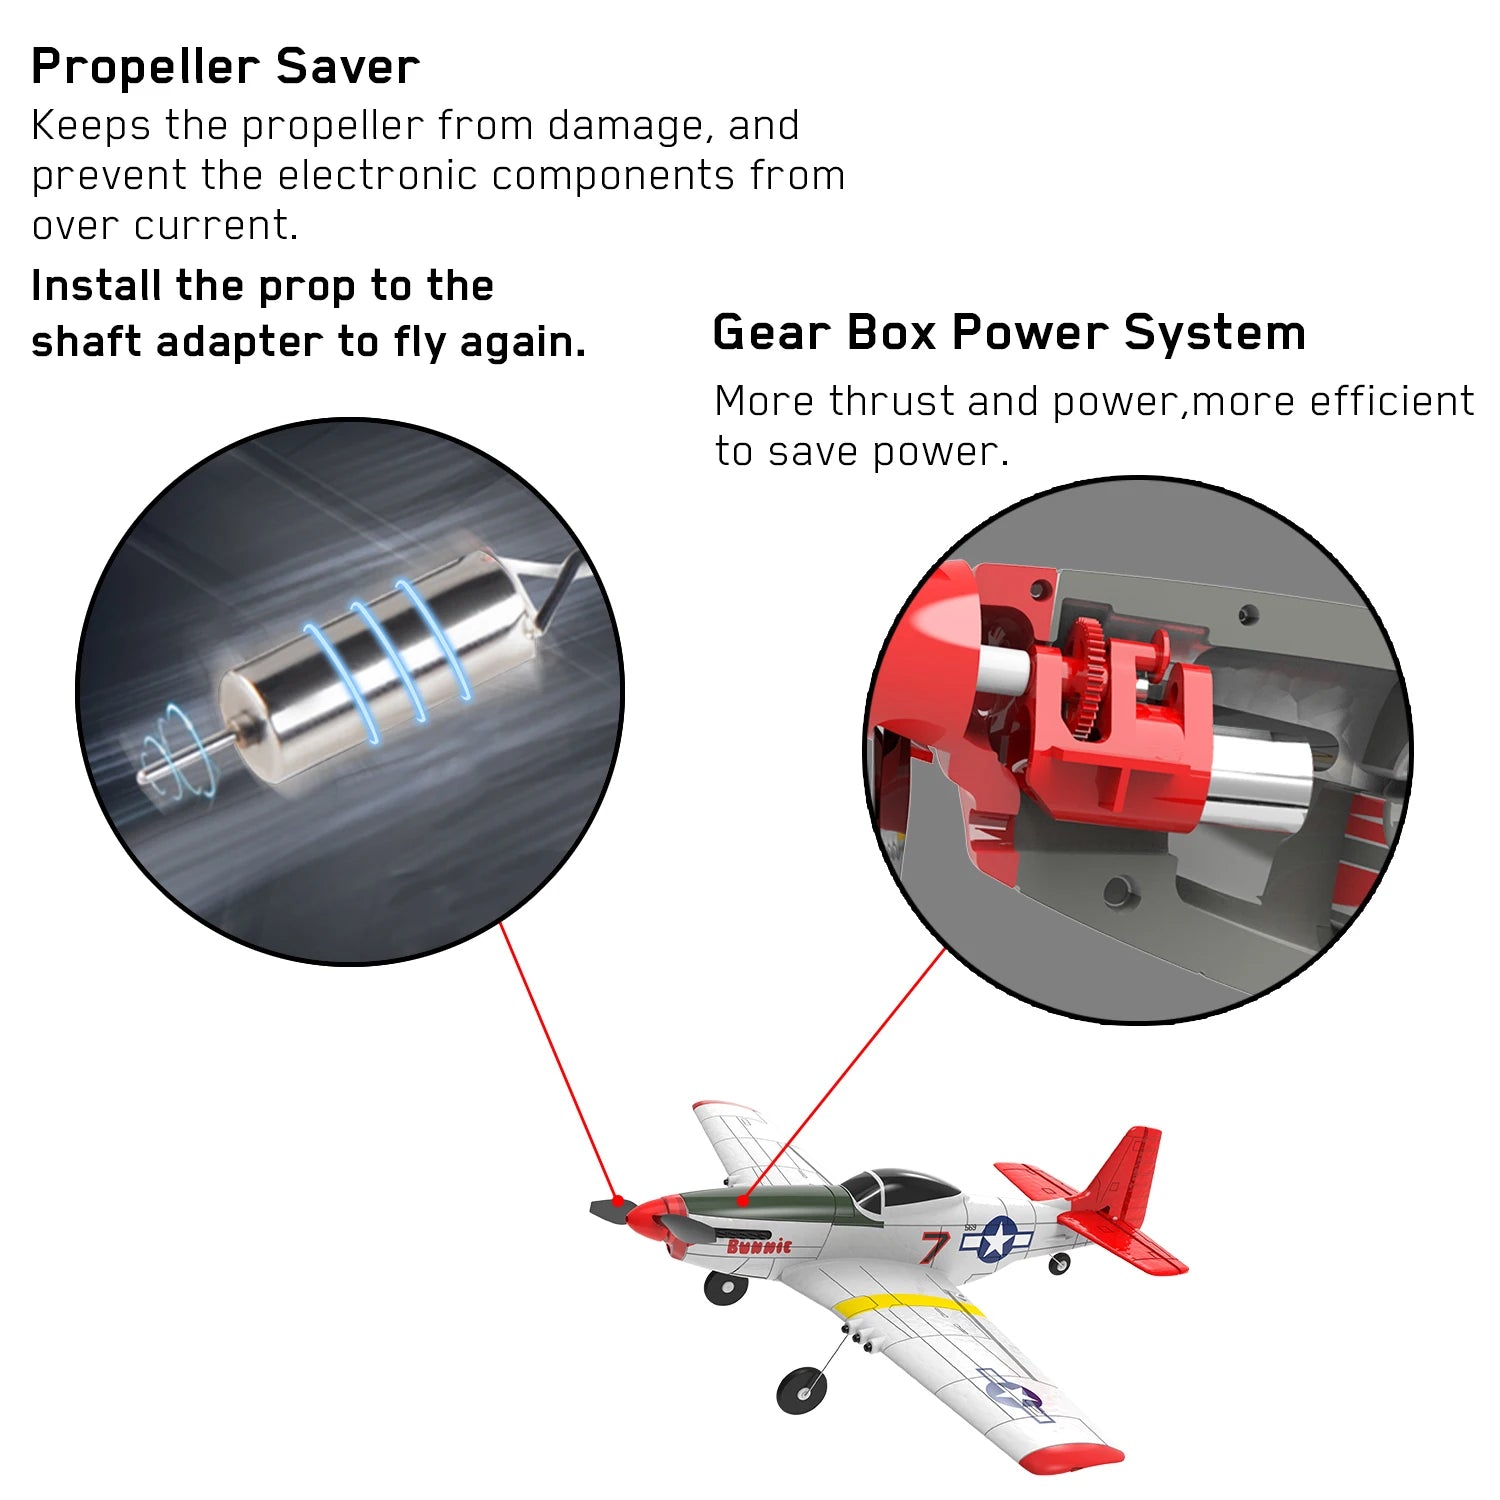 P51D RC Airplane, Propeller Saver Keeps the propeller from damage, and prevent the electronic components from over